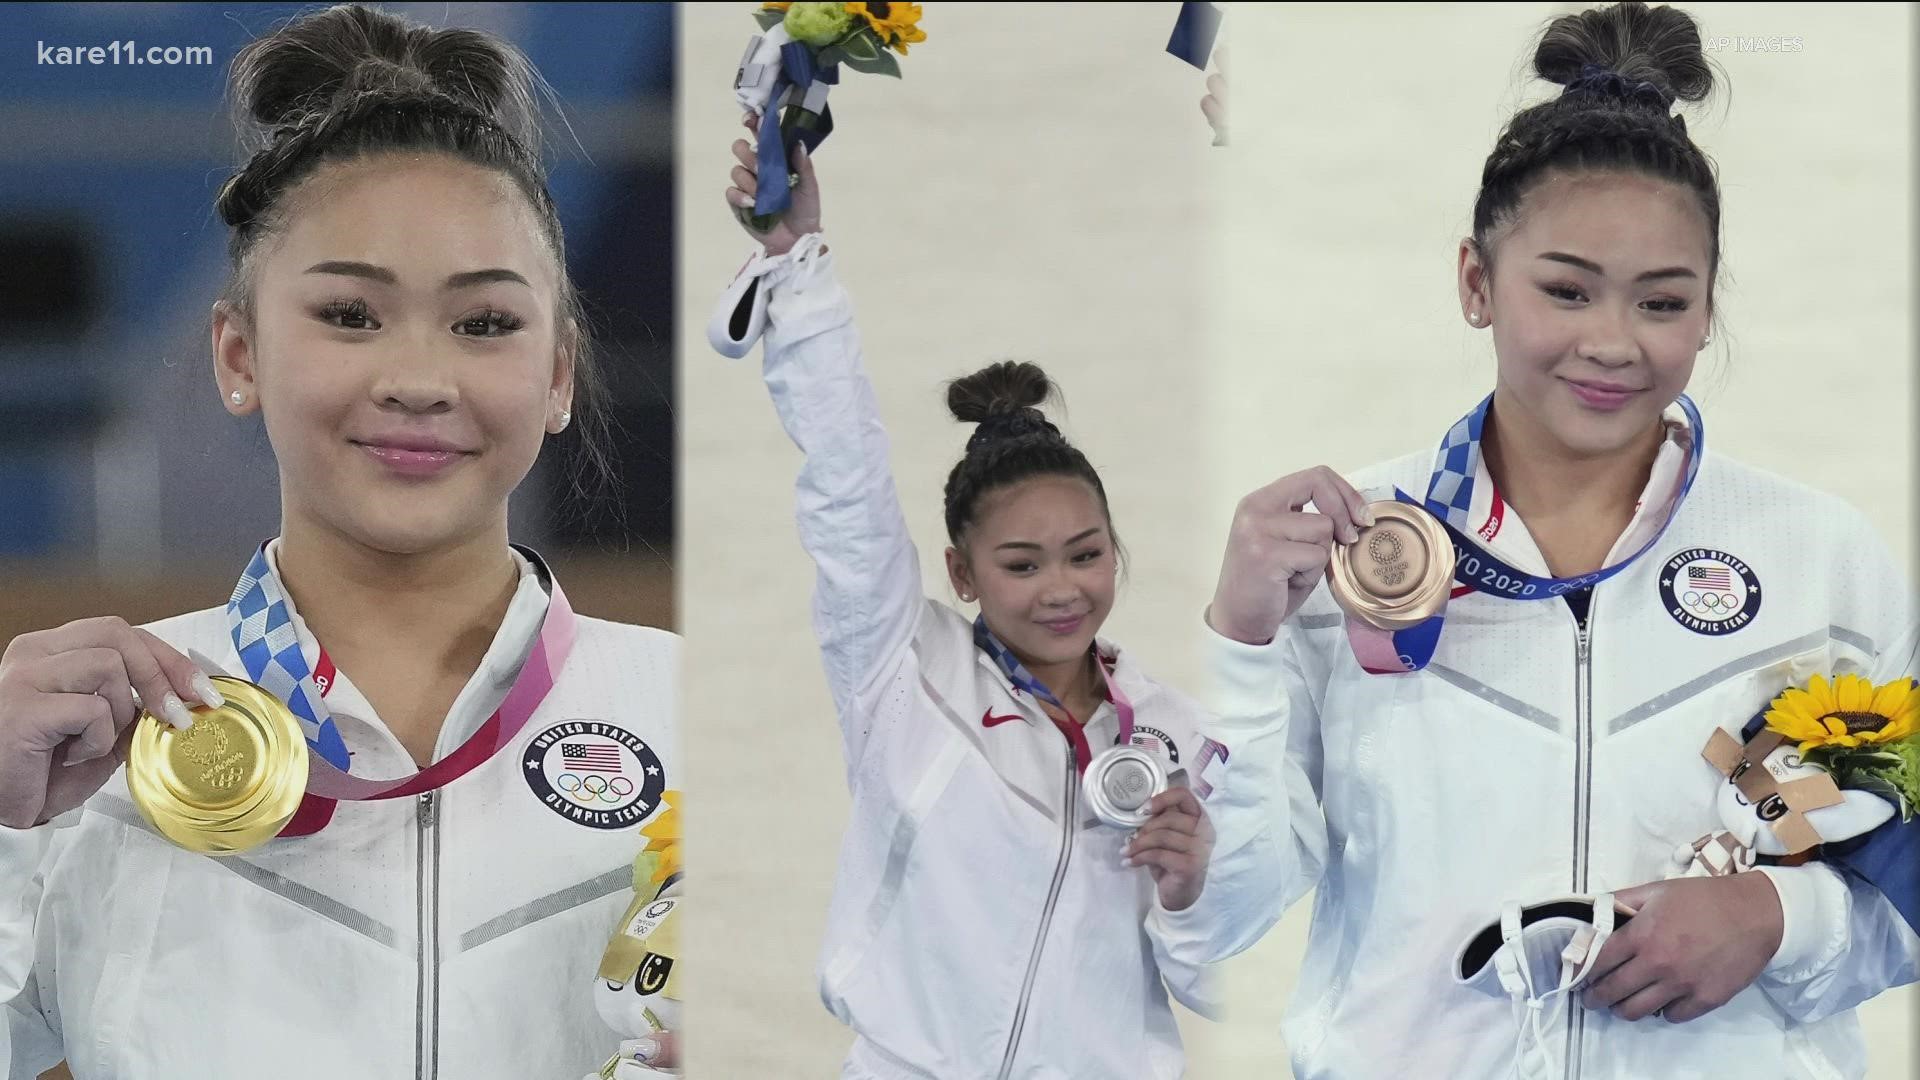 The Minnesota 18-year-old's medal haul now includes gold, silver and bronze.